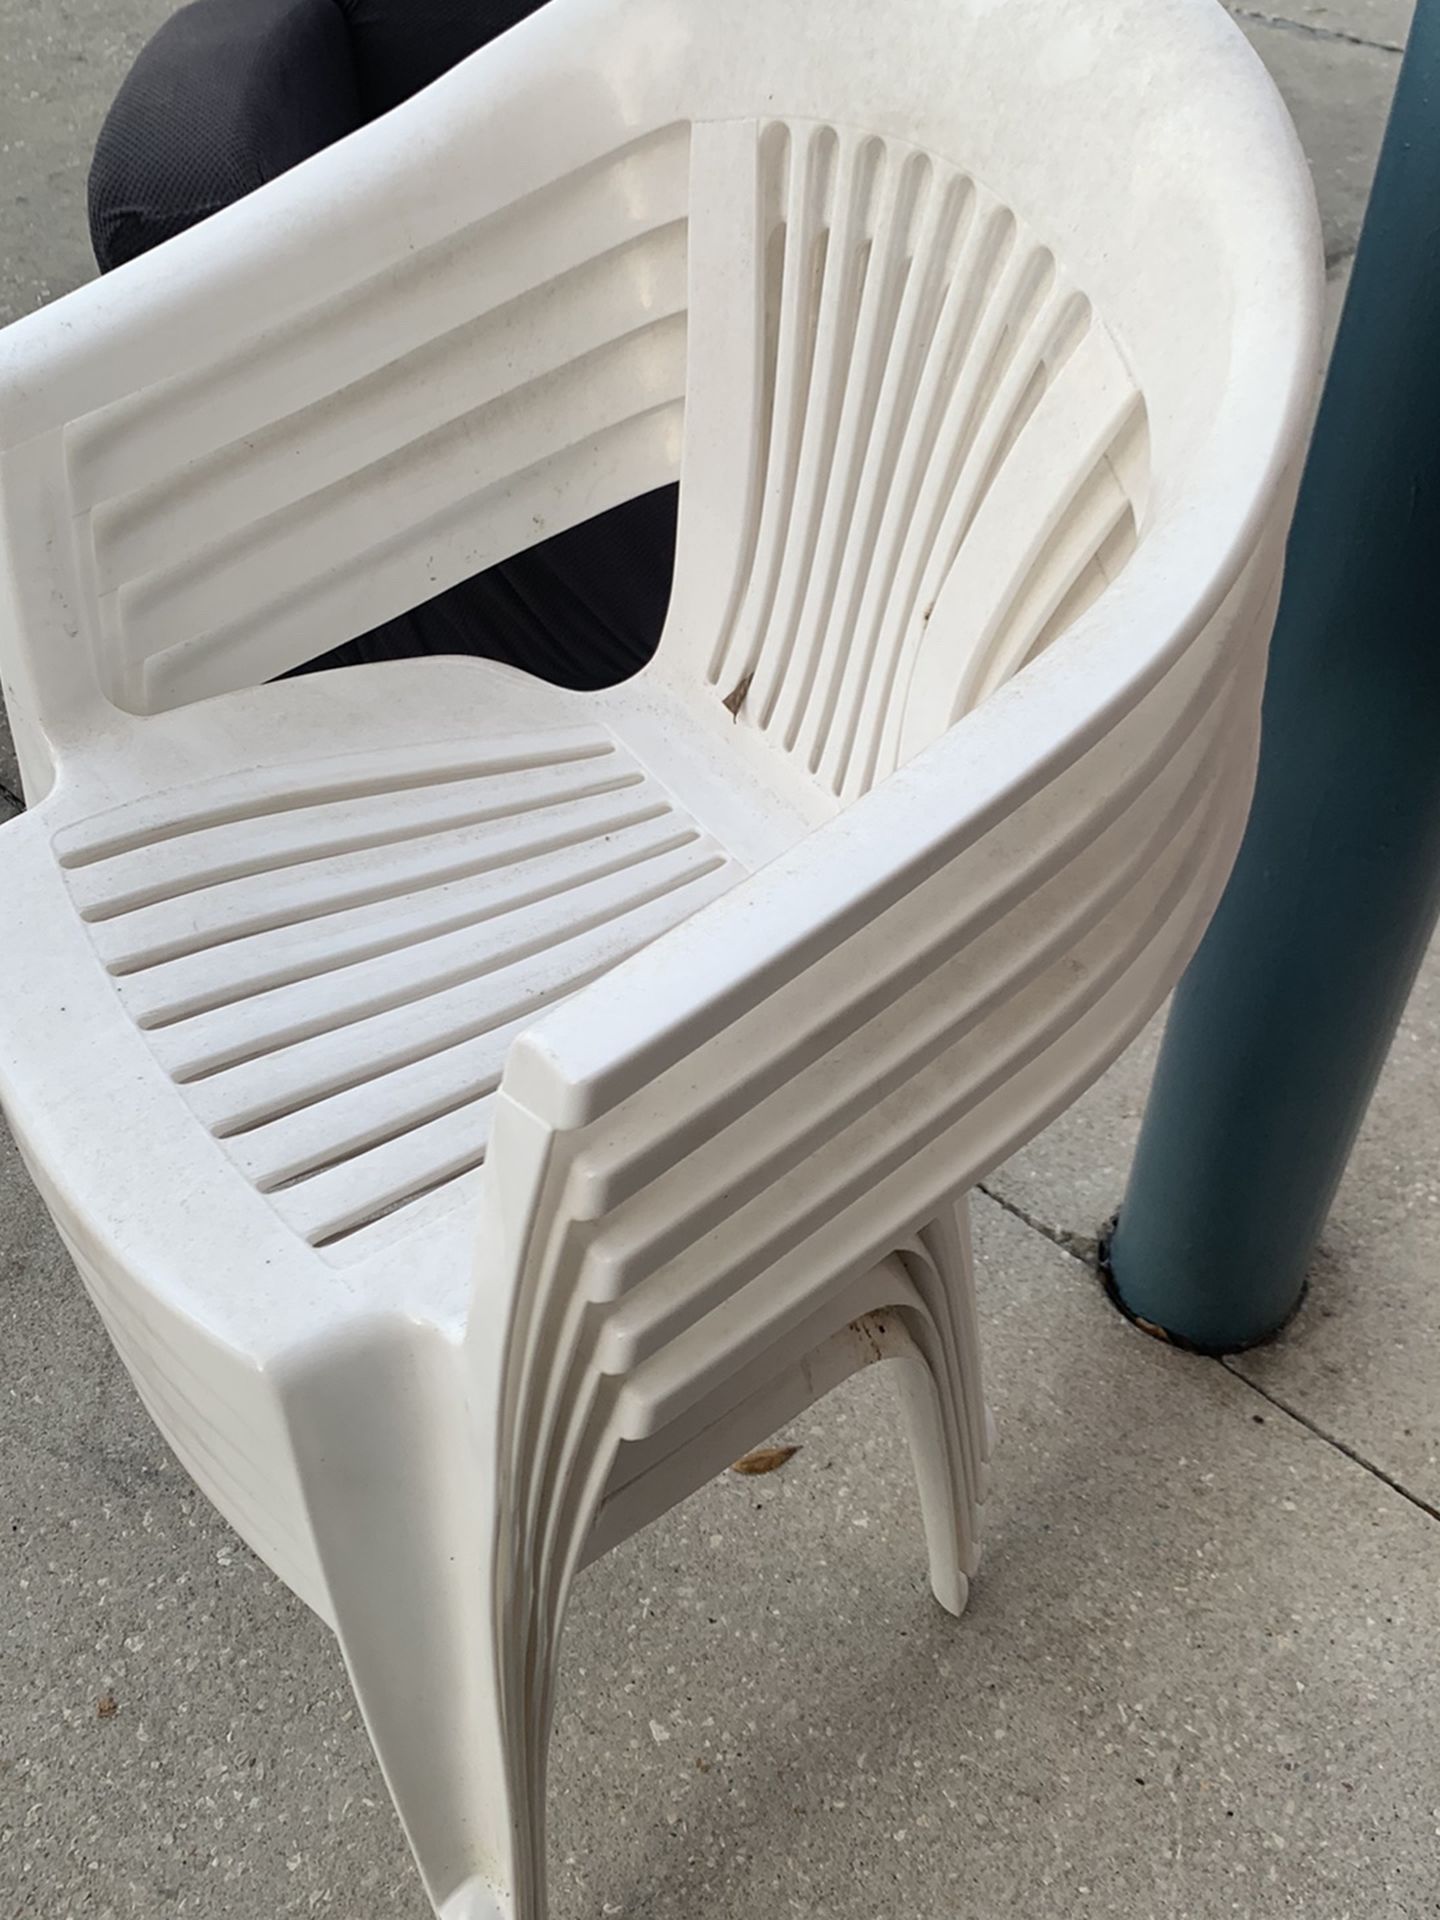 5 PLASTIC WHITE PATIO CHAIRS IN GOOD CONDITION